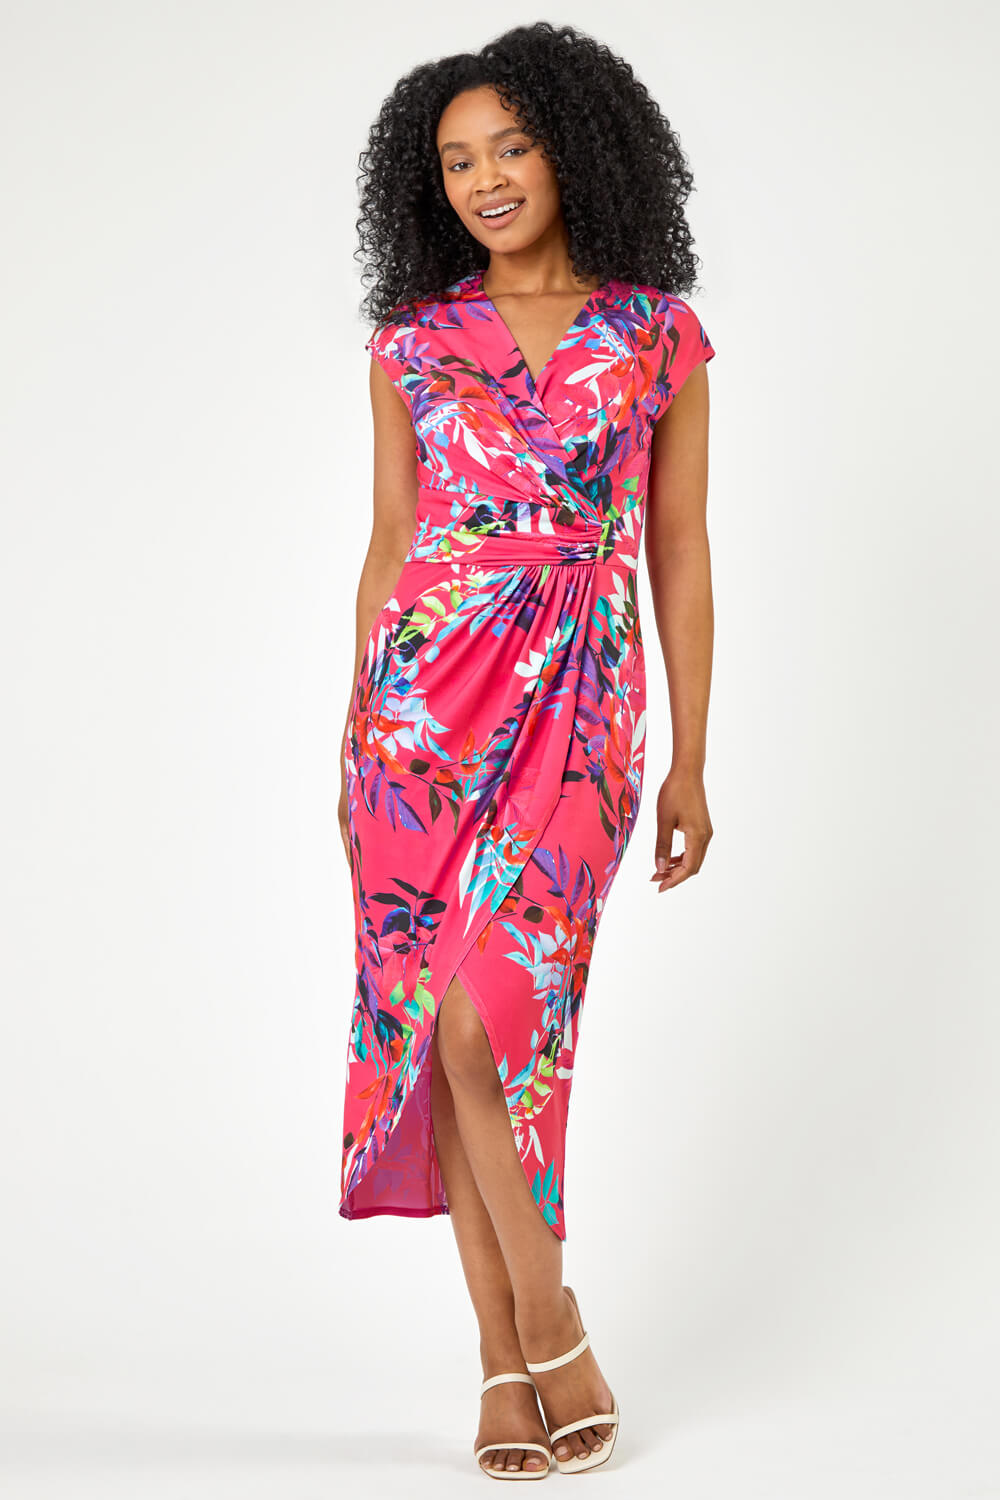 PINK Petite Tropical Print Ruched Wrap Dress, Image 3 of 5